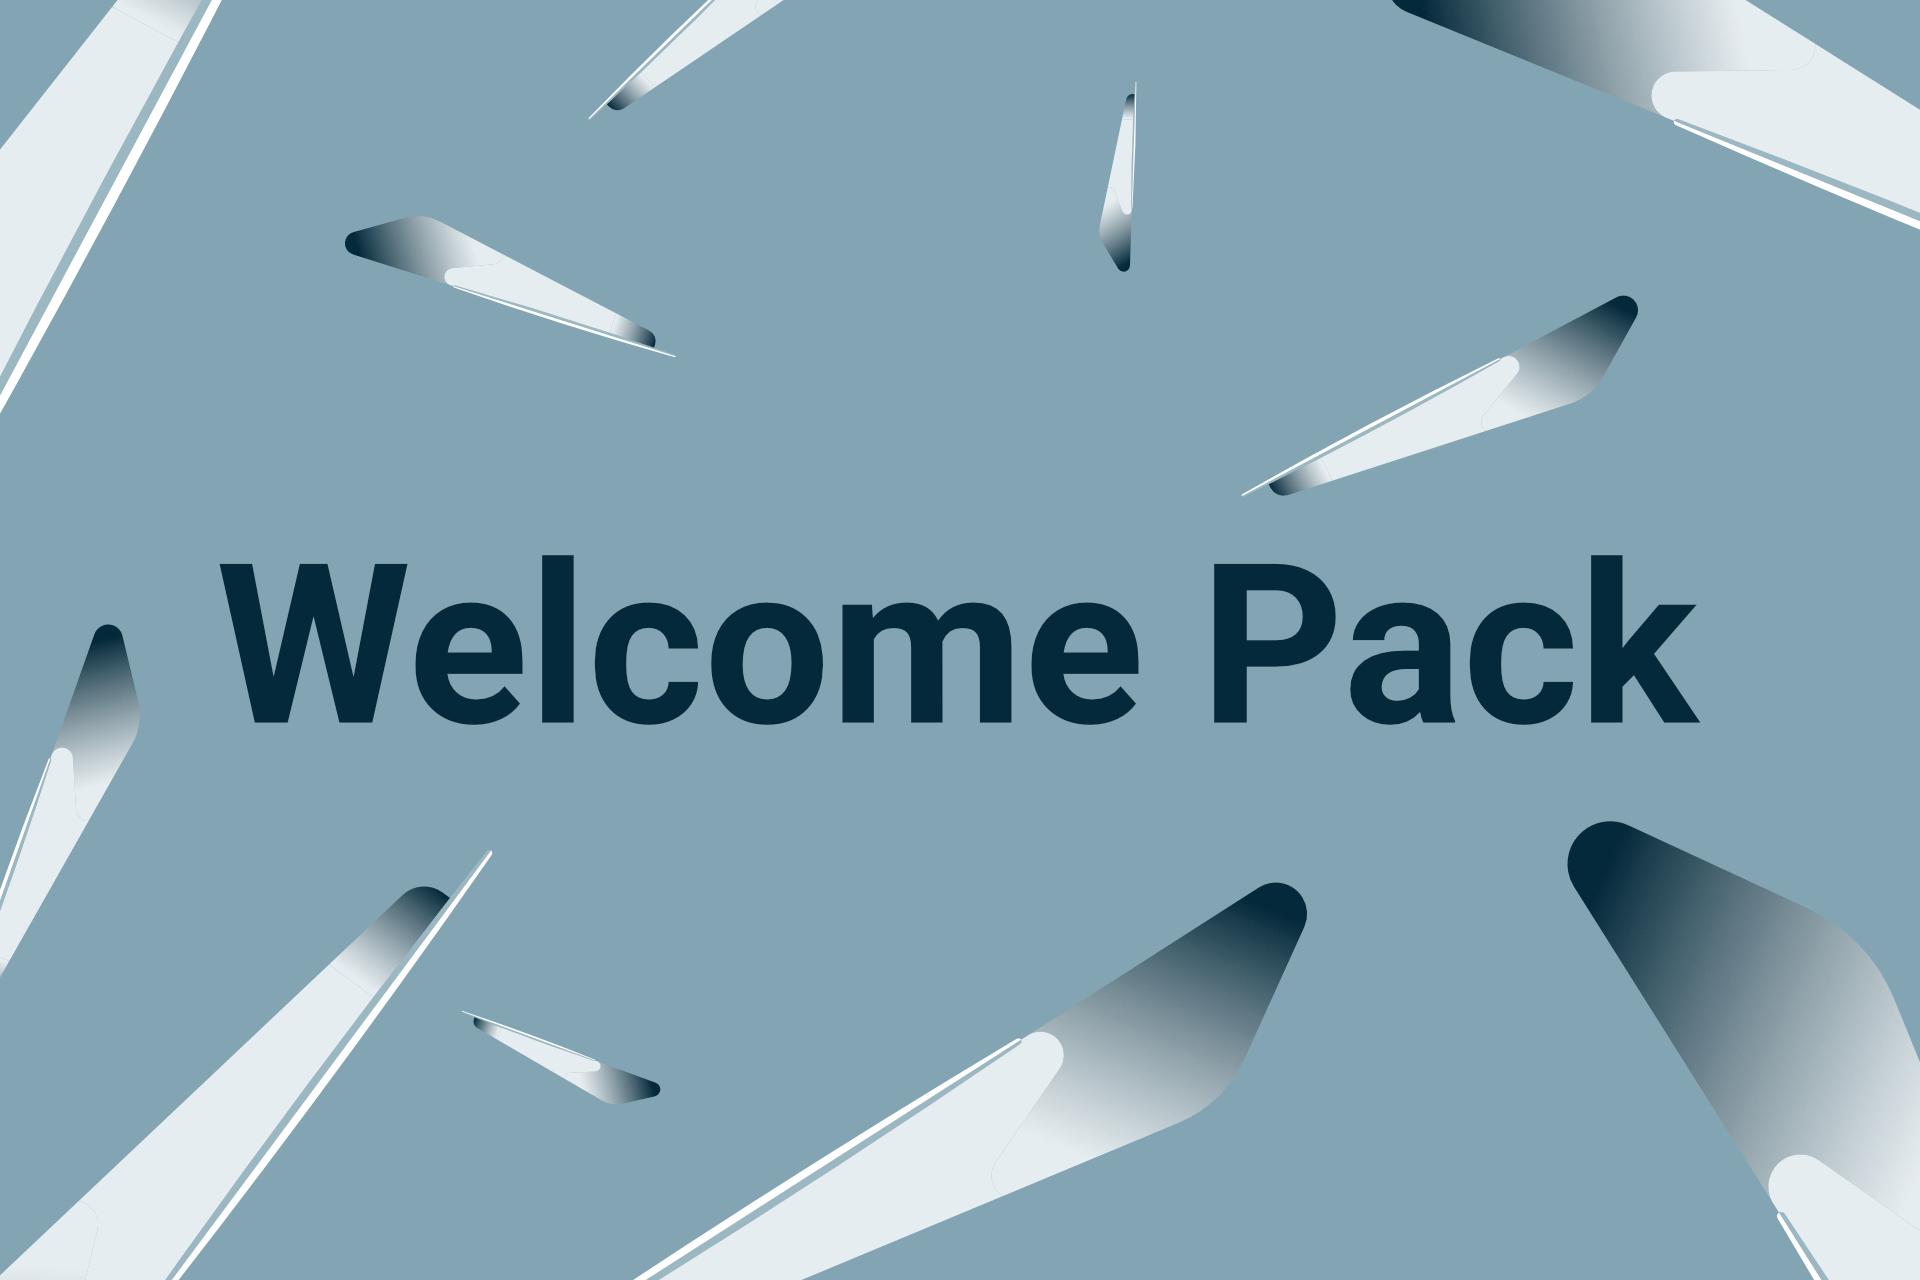 Welcome Pack